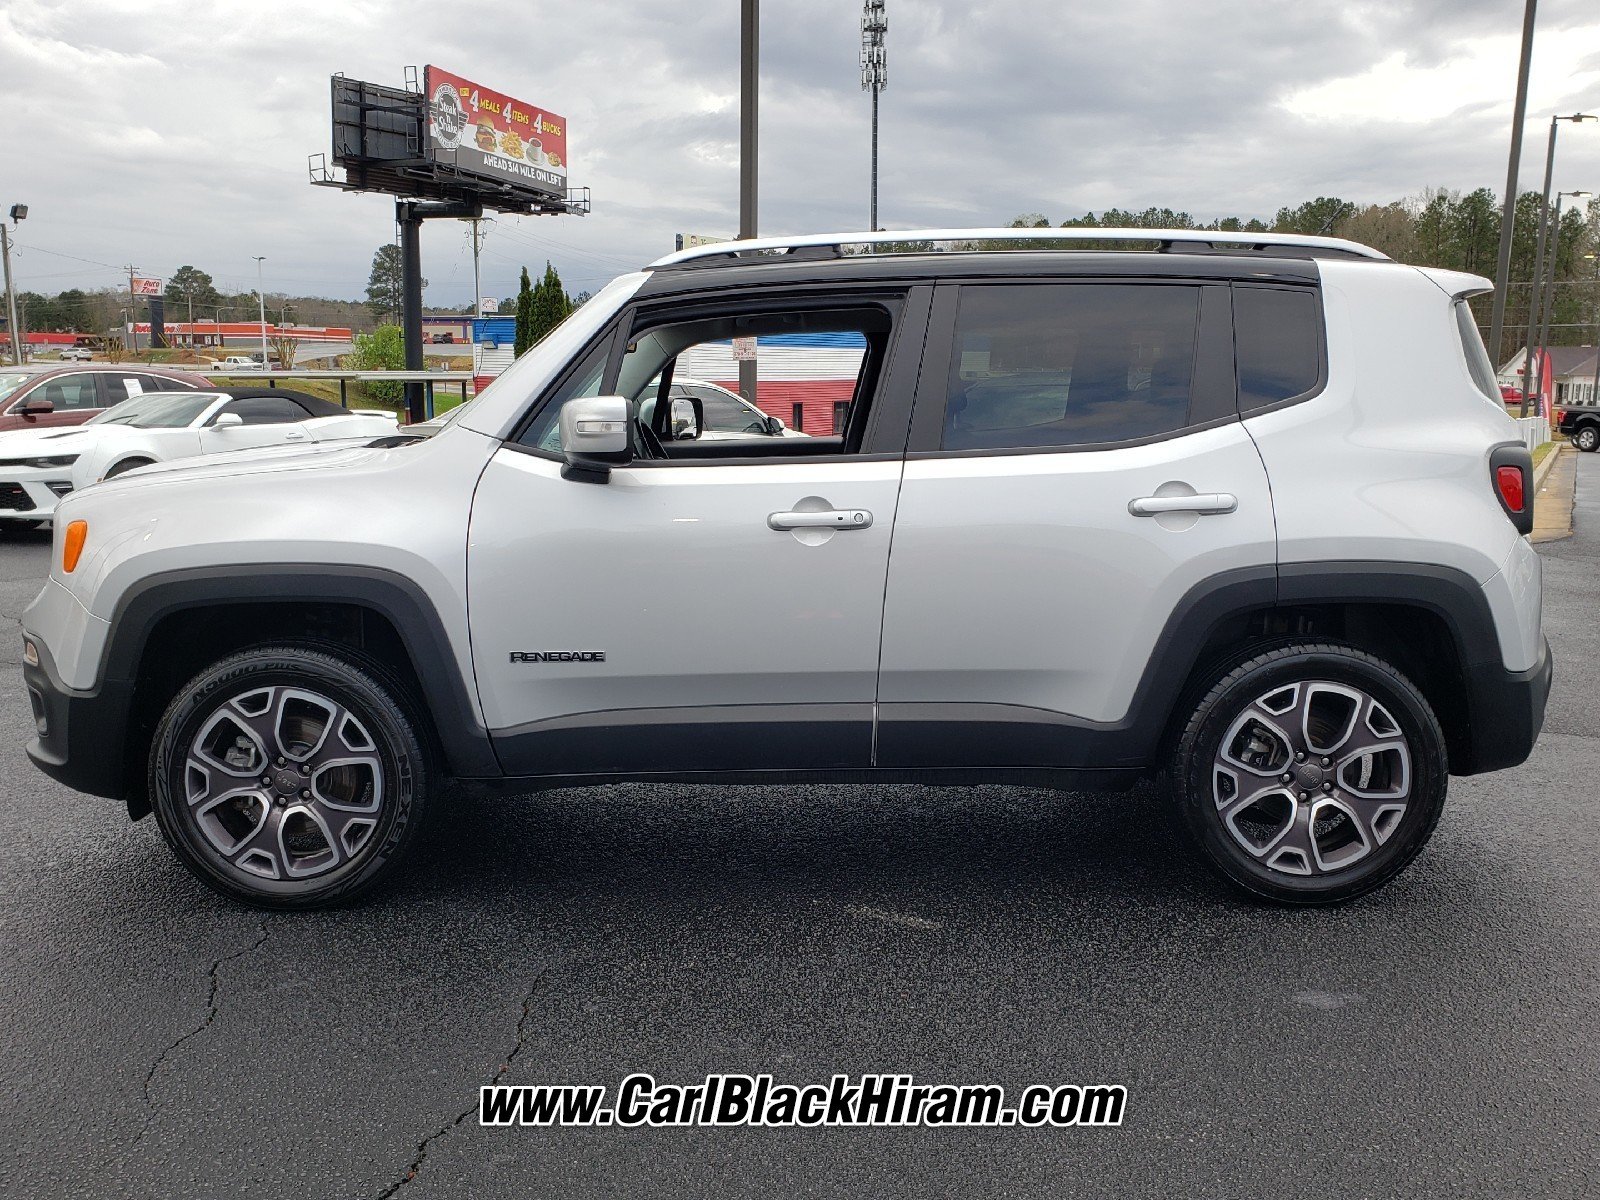 PreOwned 2017 Jeep Renegade Limited Sport Utility in